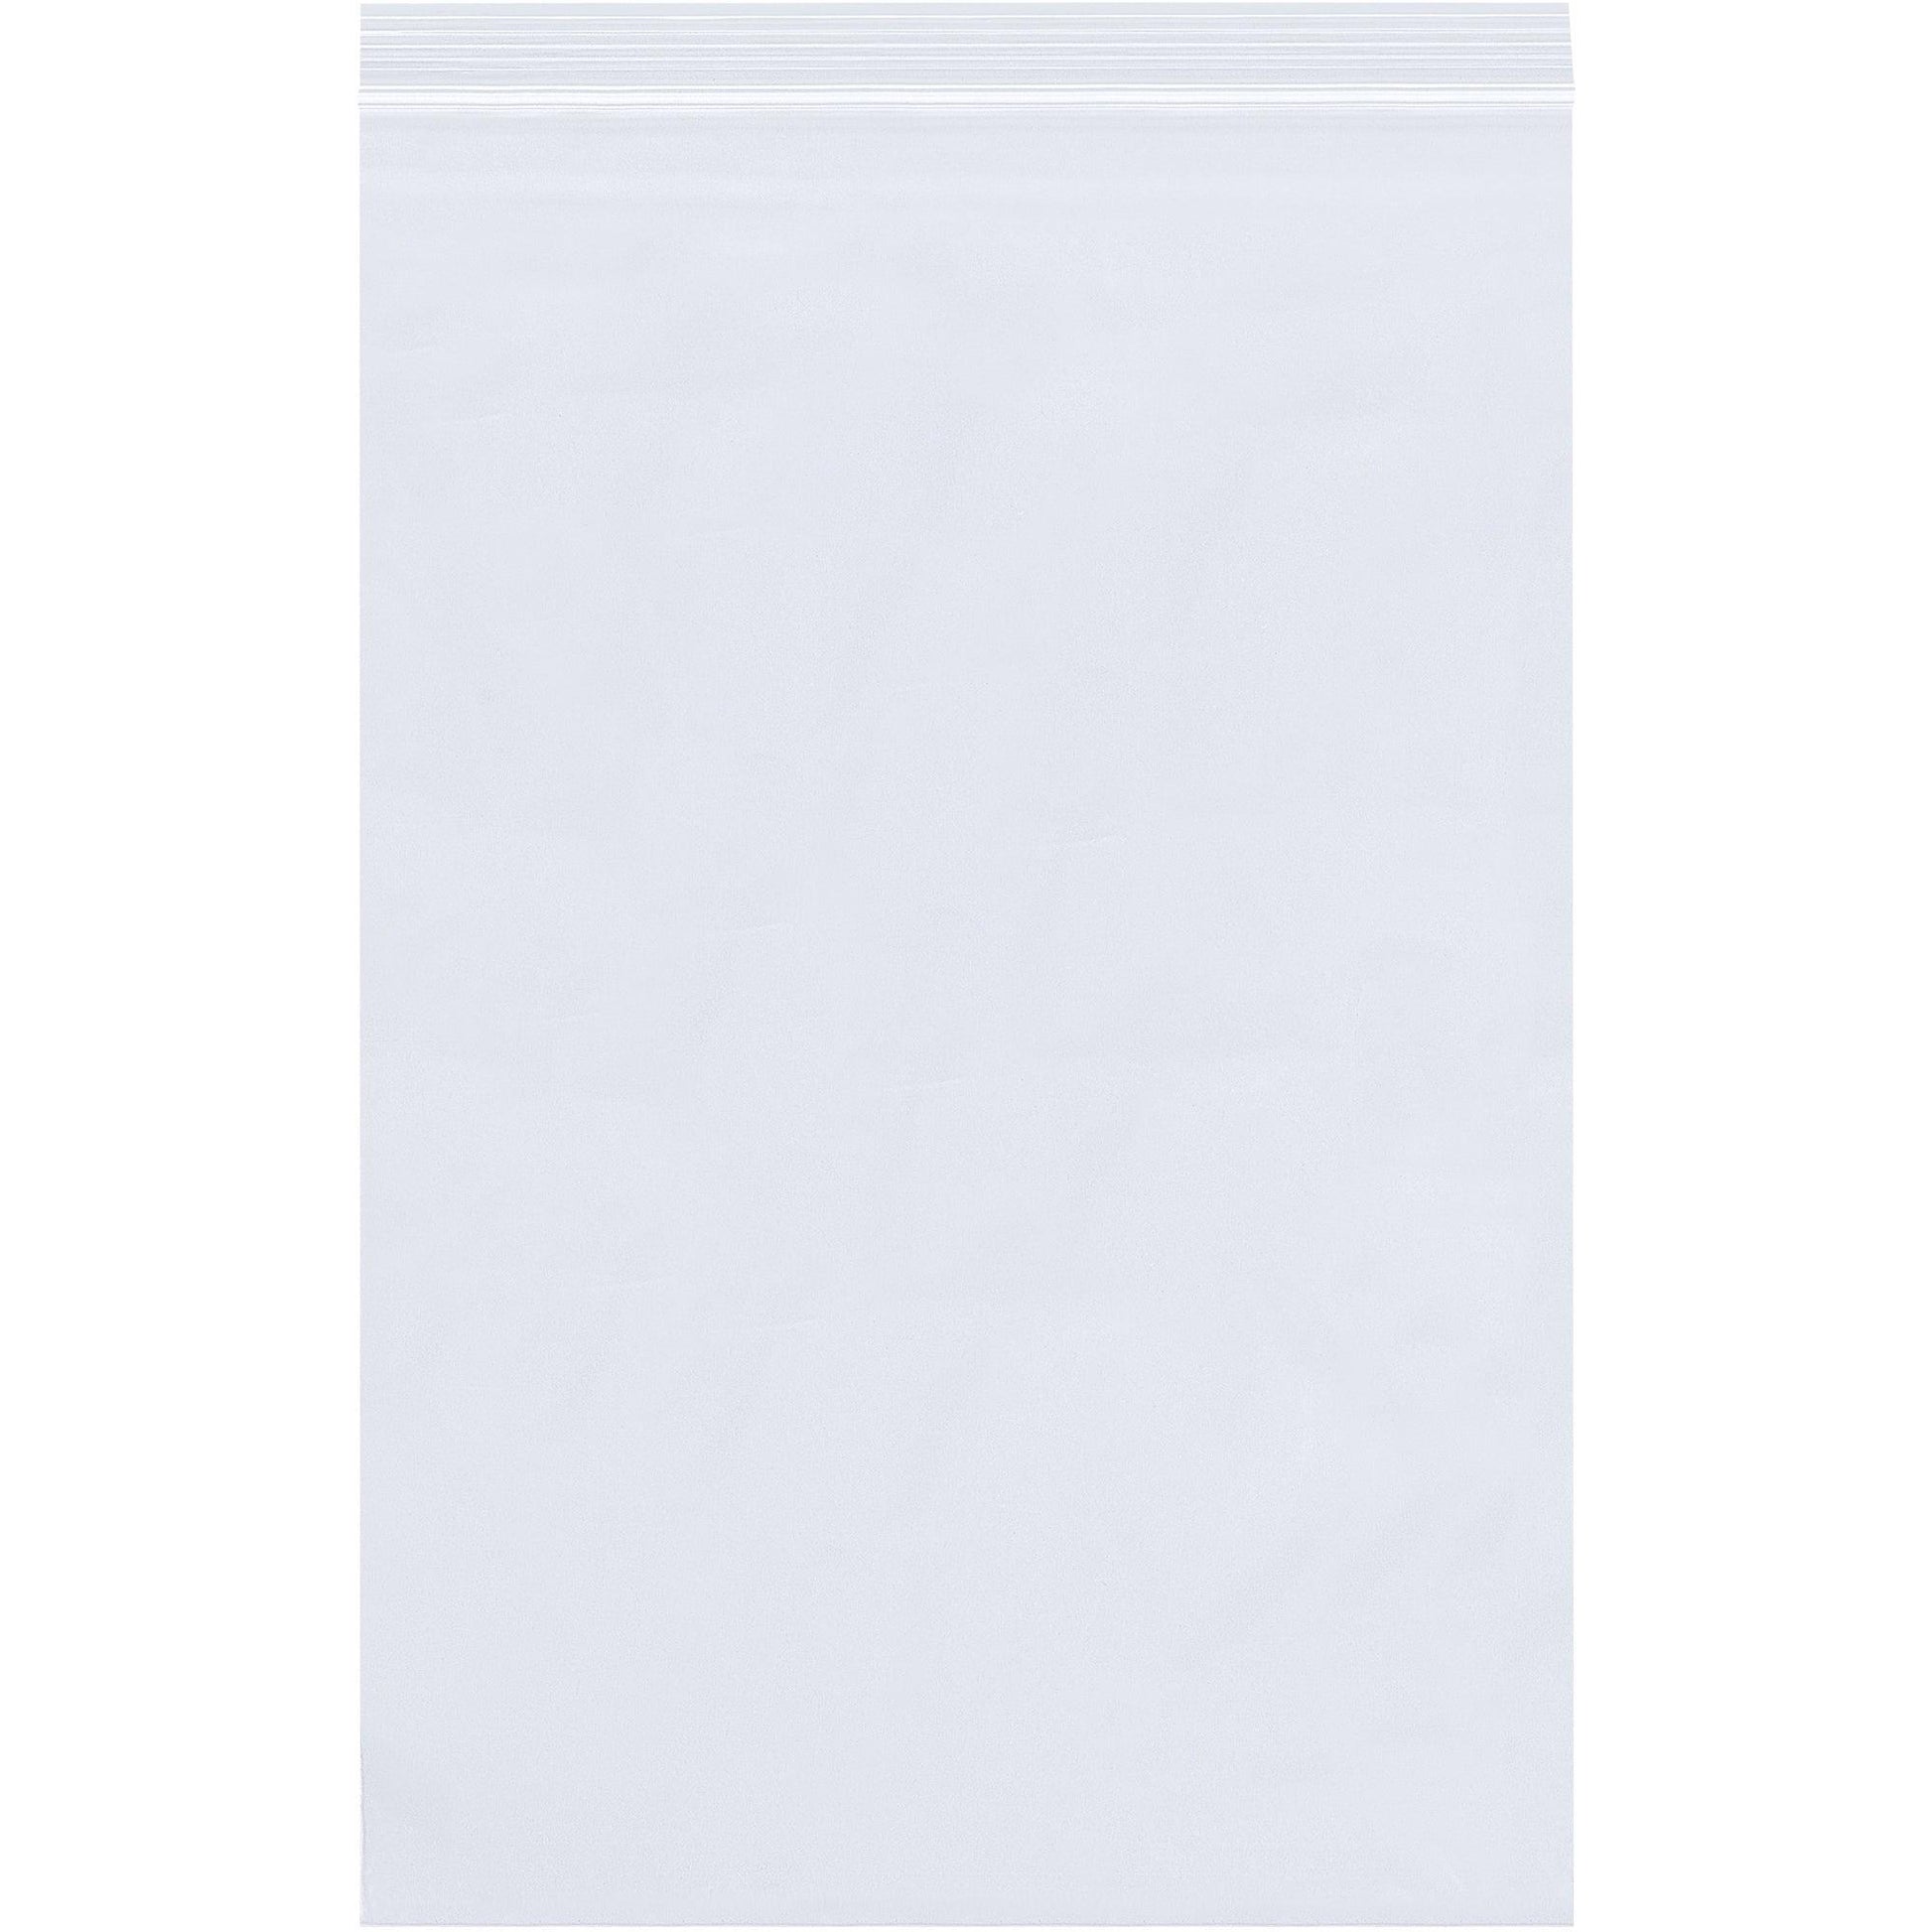 6 x 8" - 2 Mil Reclosable Poly Bags - PB3610